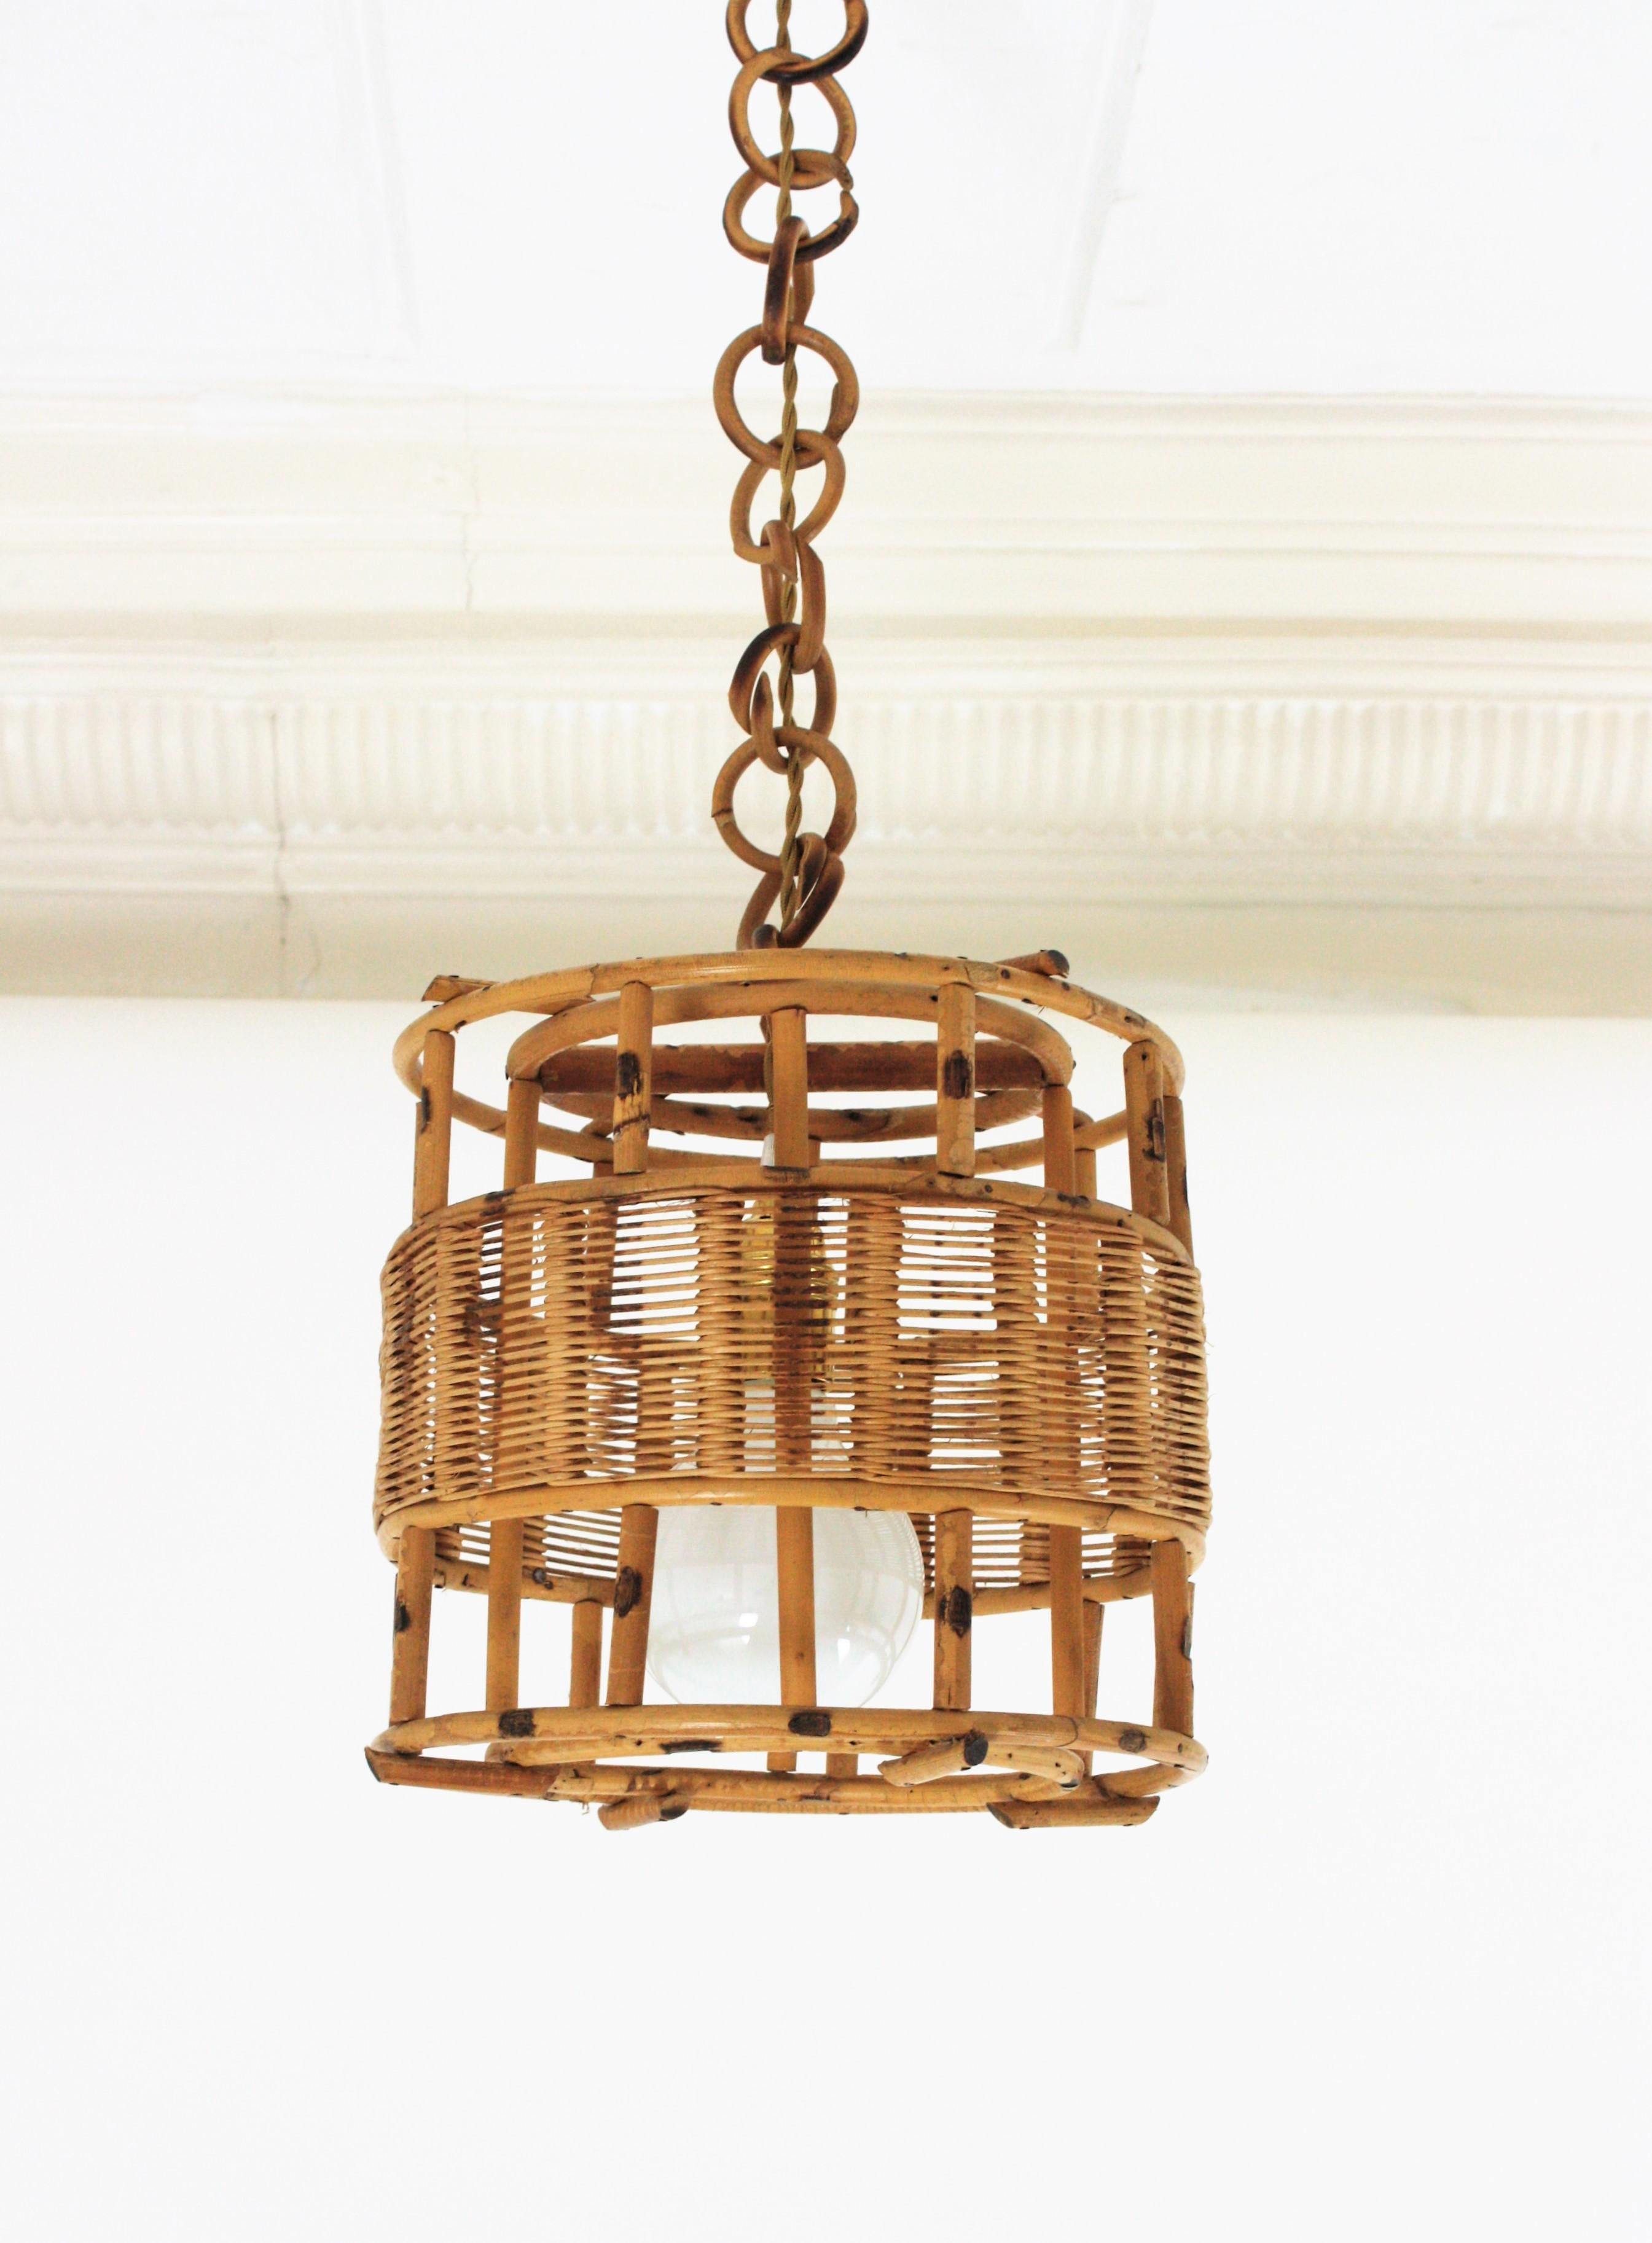 Bamboo French Rattan Cylinder Pendant Light or Lantern, 1950s For Sale